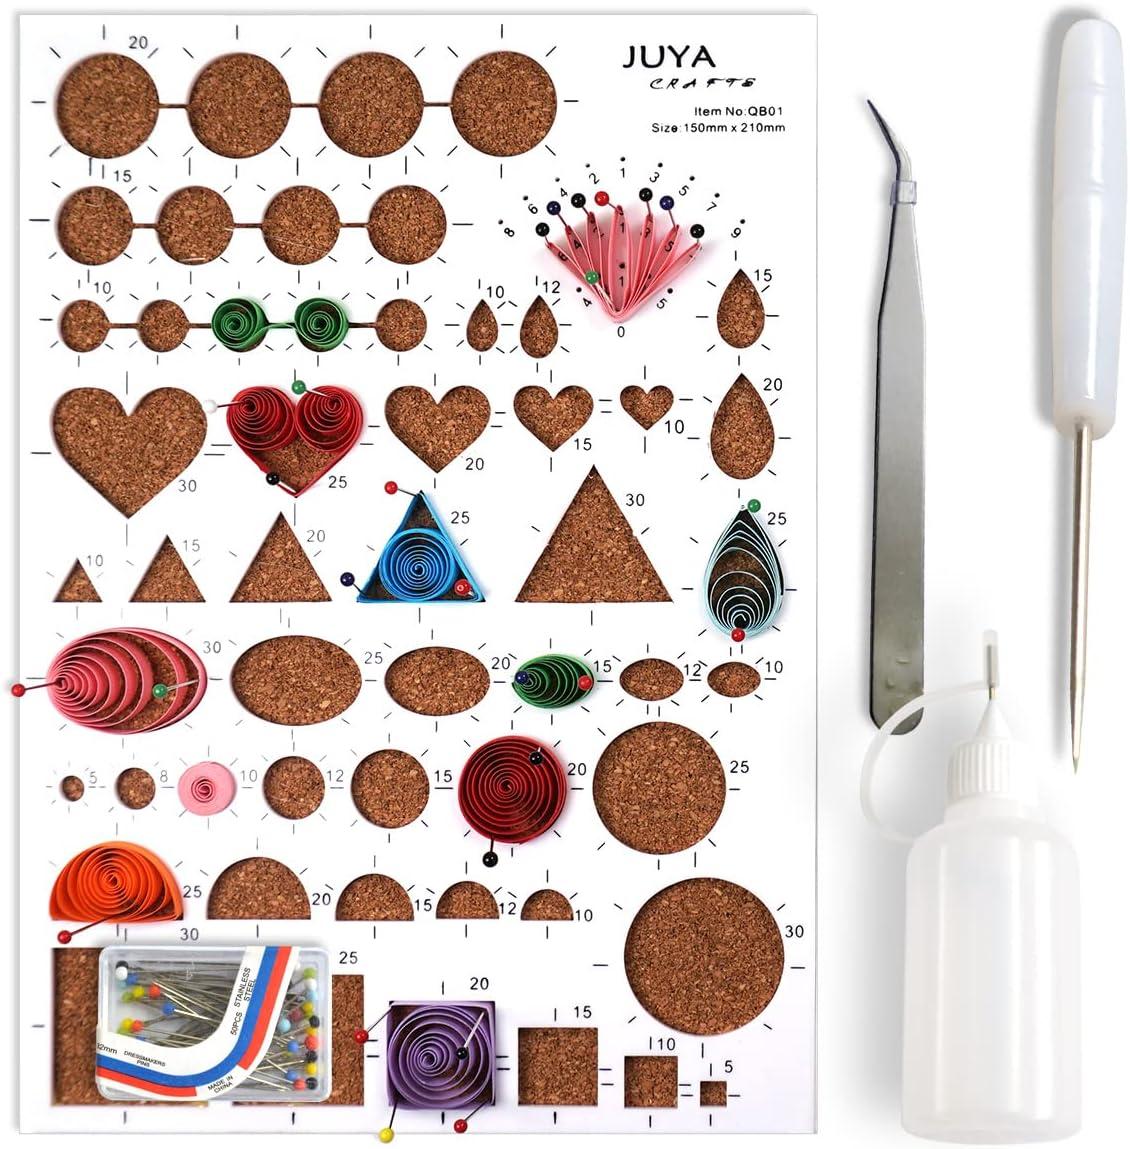  JUYA Paper Quilling Kits with 30 Colors 600 Strips and 8 Tools ( Paper Width:3mm, Blue Tools)